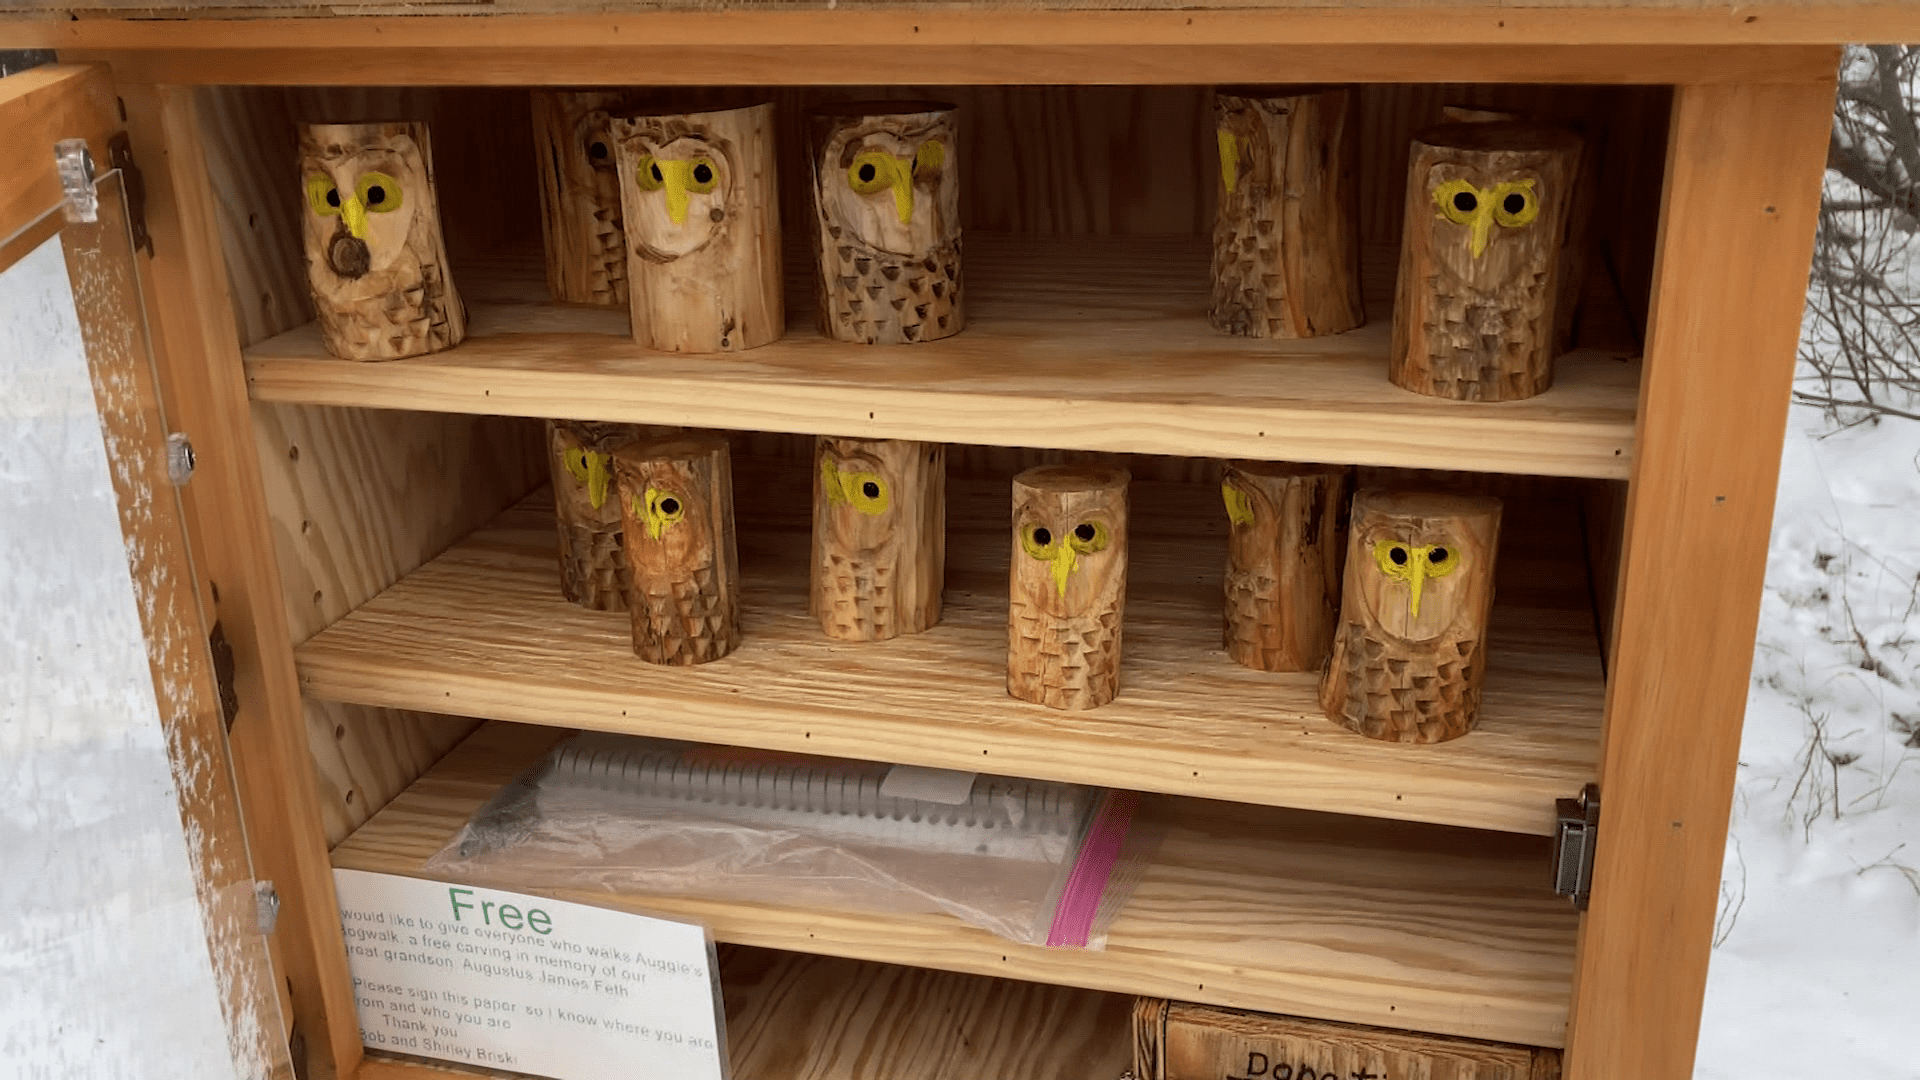 Auggie’s owls are now helping young people advance their education